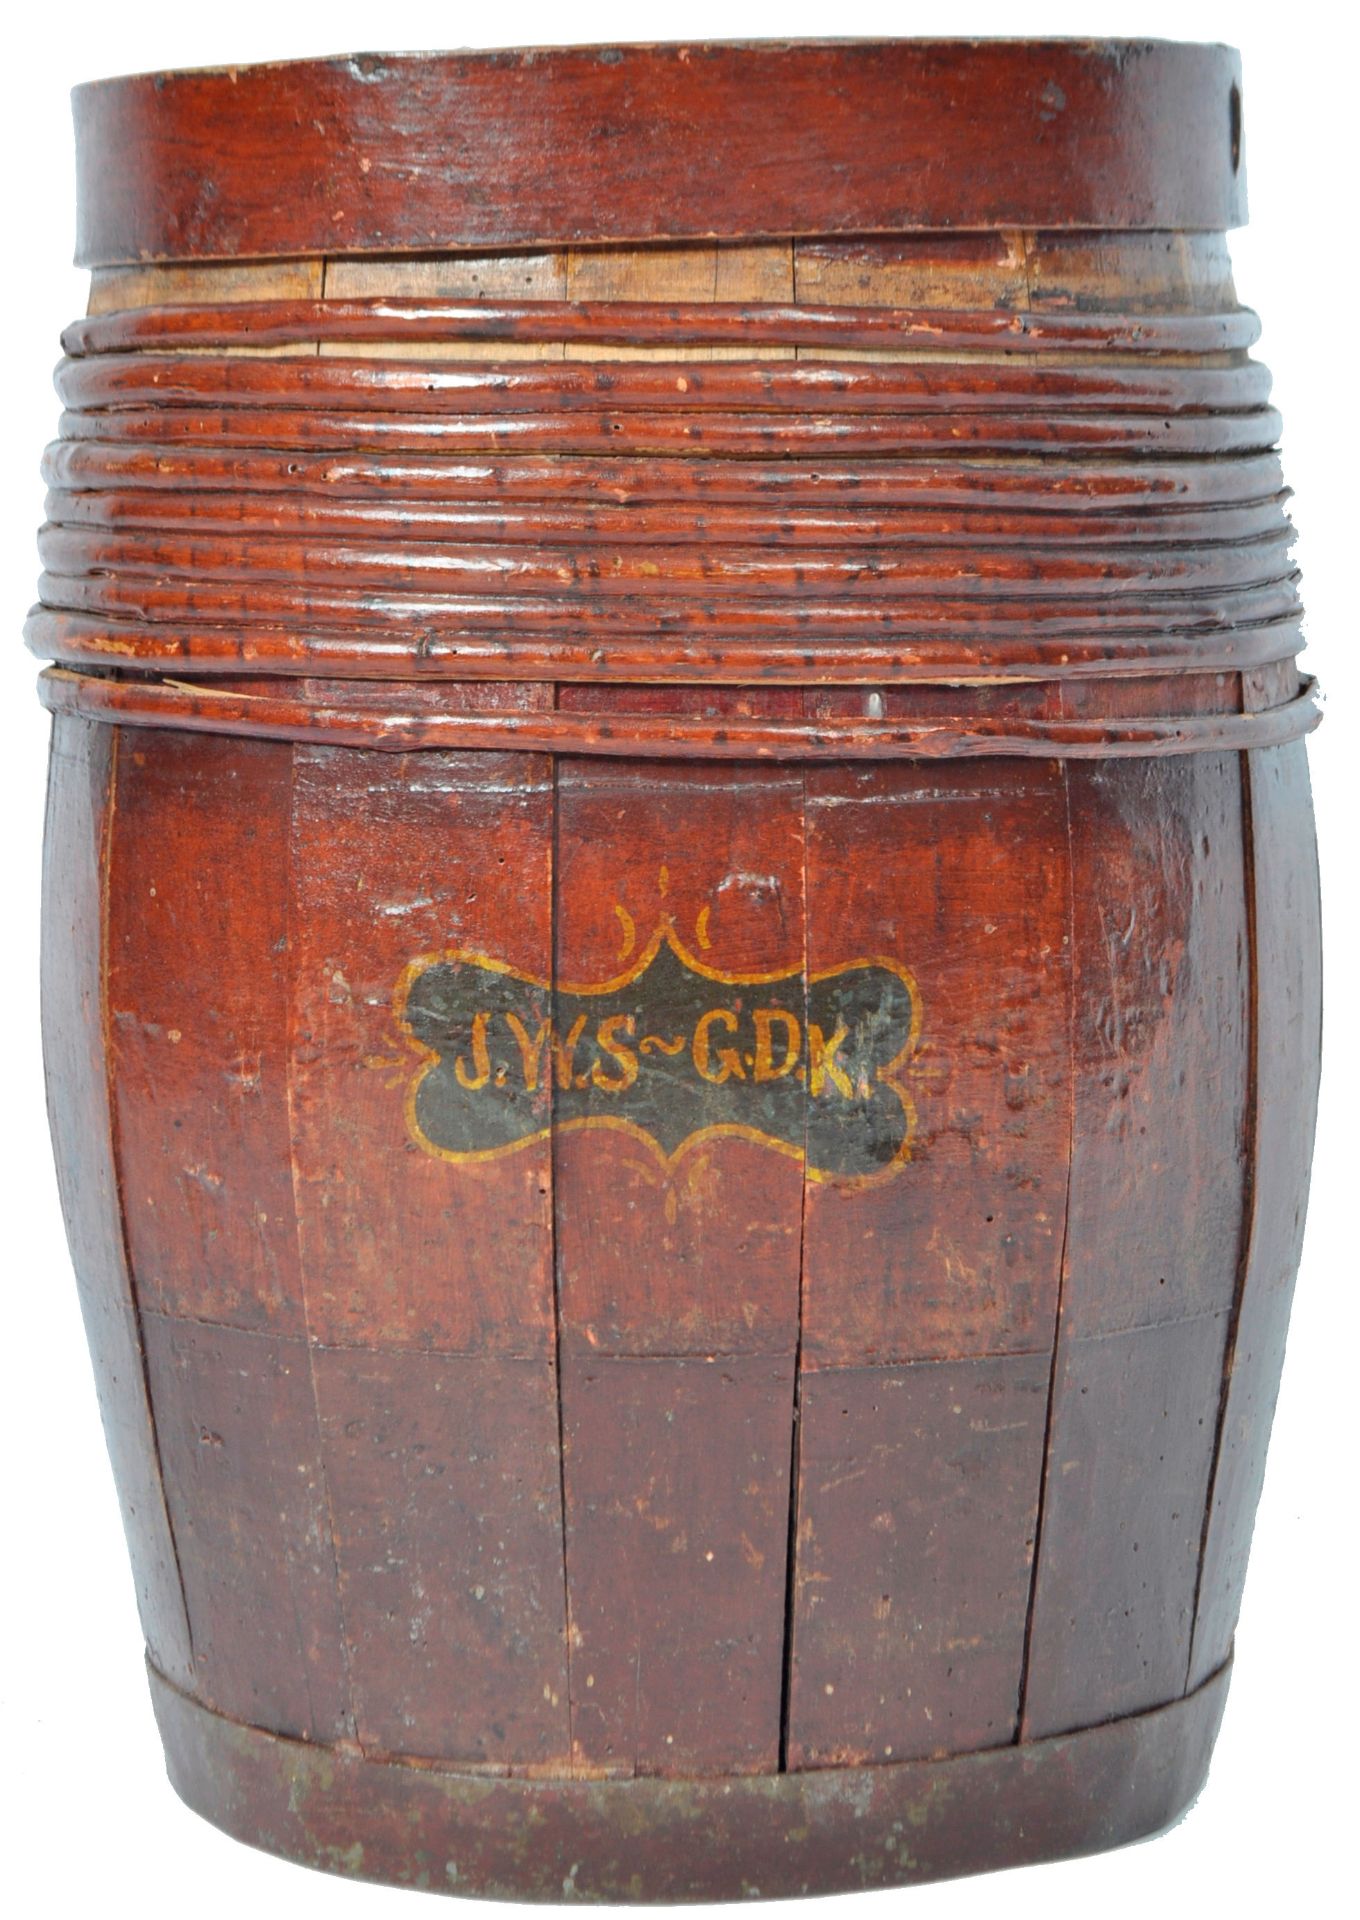 LARGE 19TH CENTURY SHIPPING SPICE BARREL WITH LID